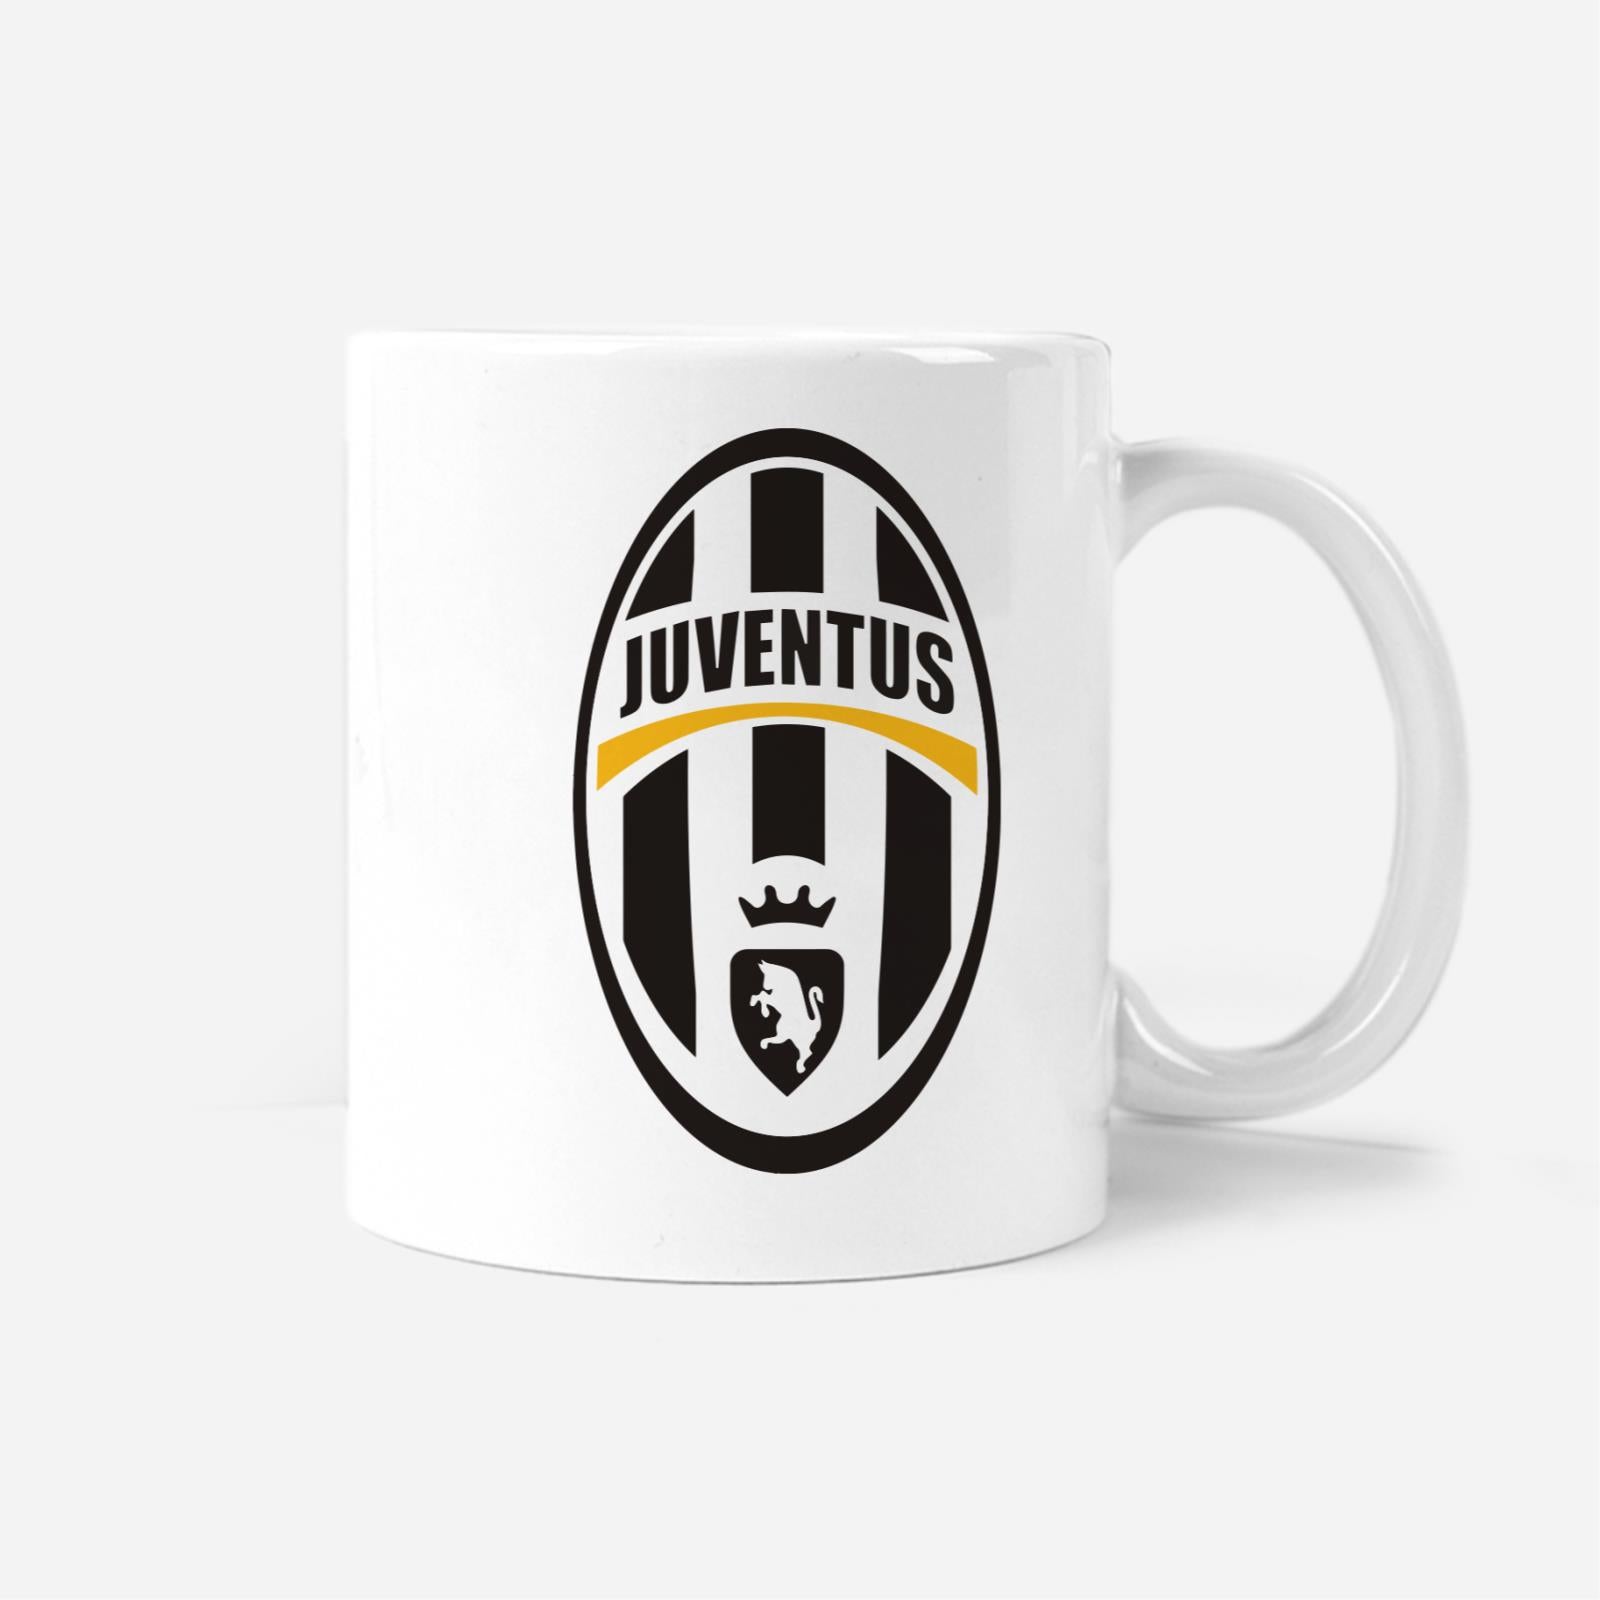 Juventus Football Fan Mug Personalizable with Name and Number